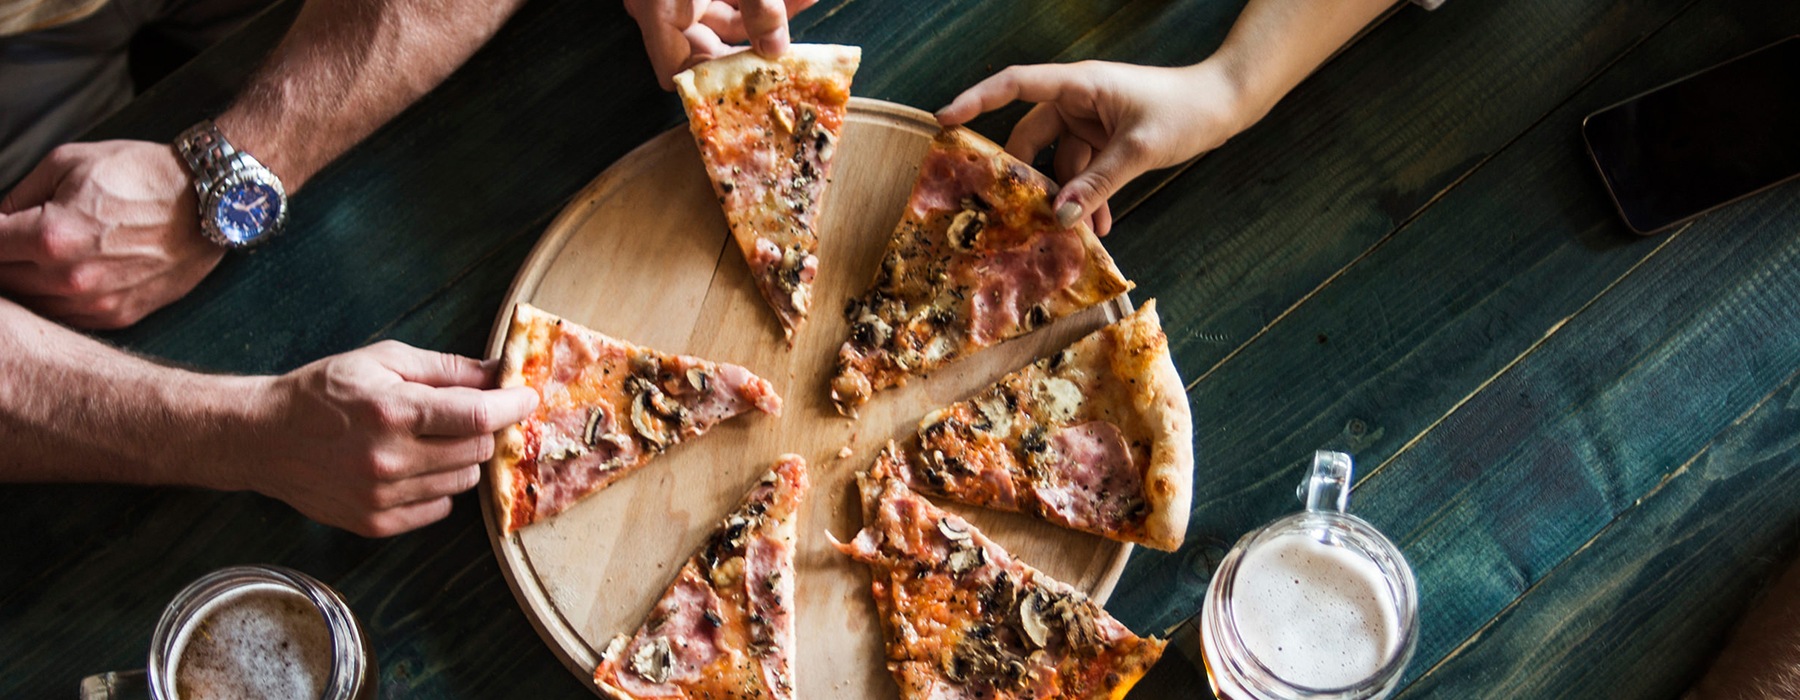 lifestyle image of hands pulling apart a large pizza